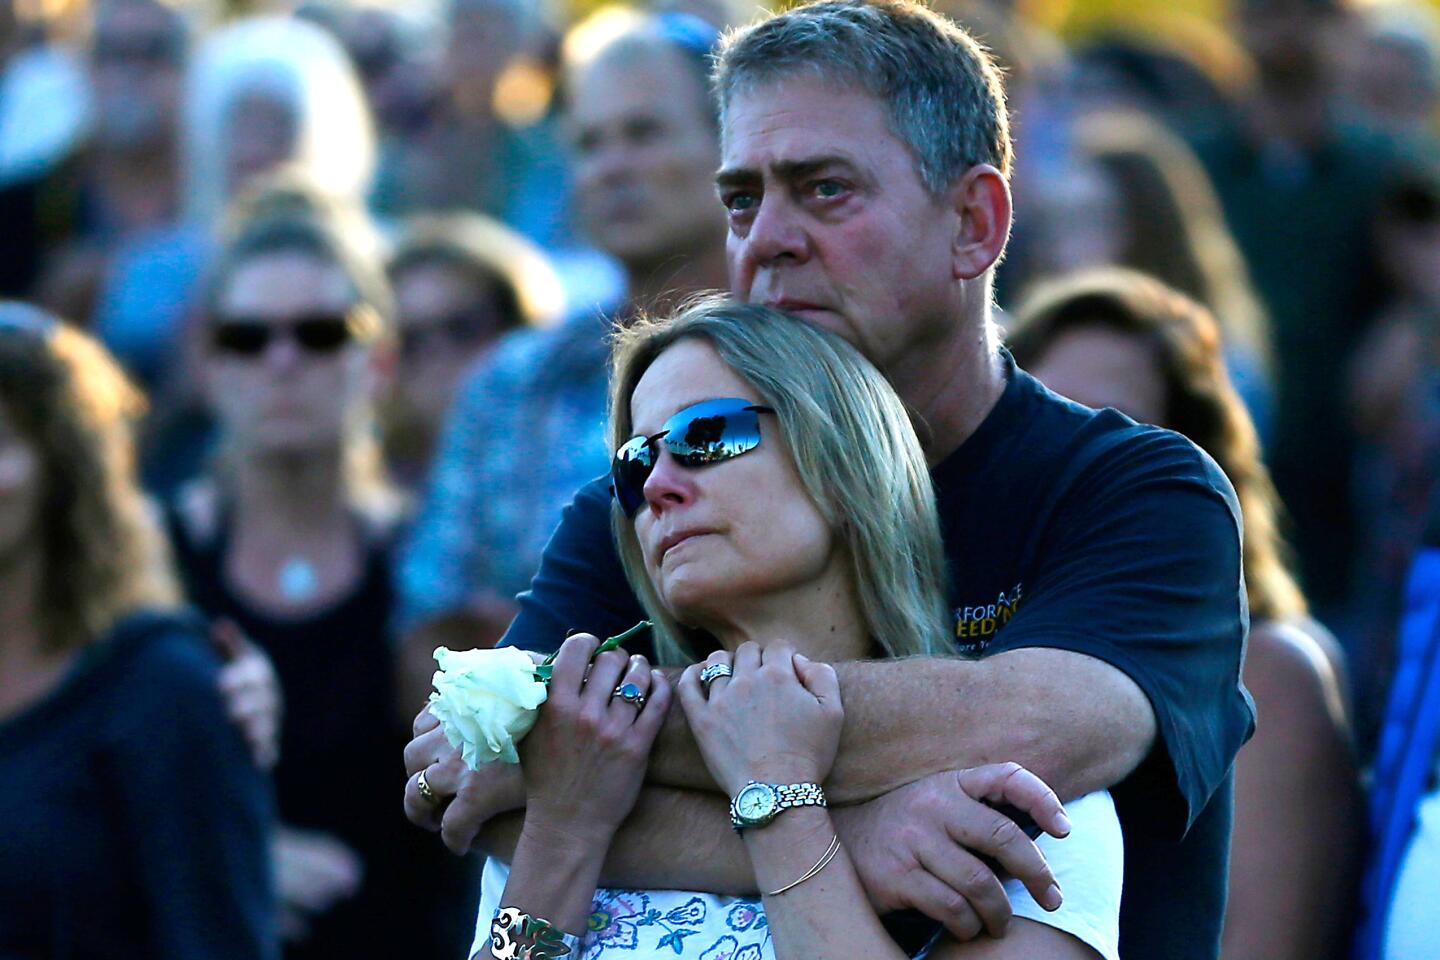 Mourners gather for a vigil at Chase Palm Park in Santa Barbara on Friday evening honoring the victims of the Conception boat fire that broke out off Santa Cruz Island before dawn Monday and claimed 34 lives.